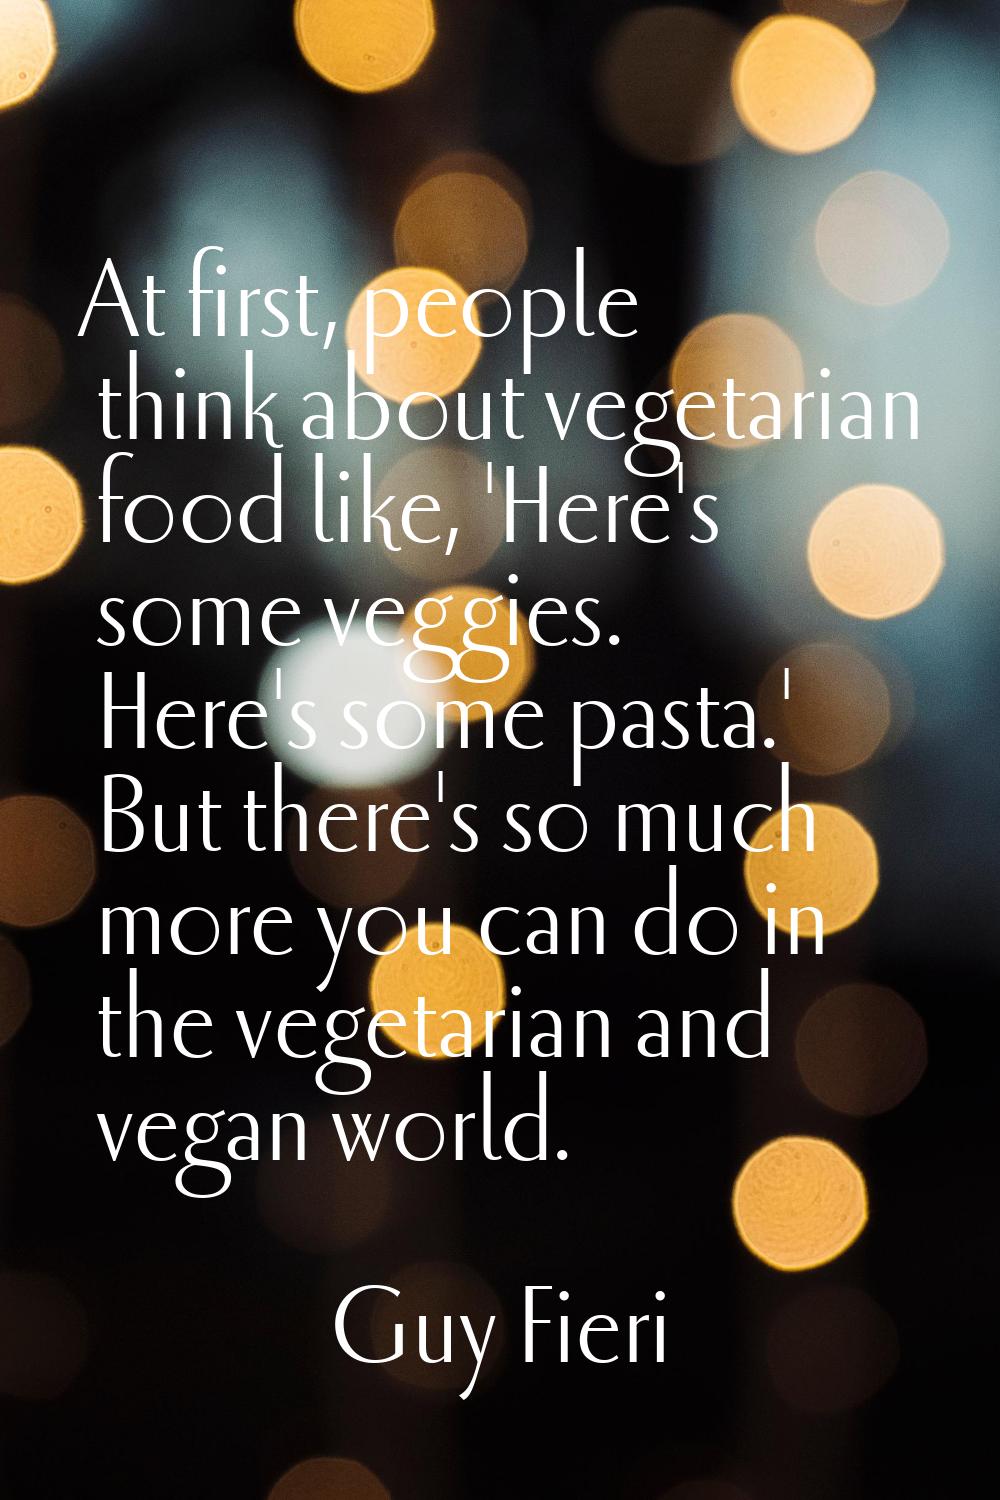 At first, people think about vegetarian food like, 'Here's some veggies. Here's some pasta.' But th